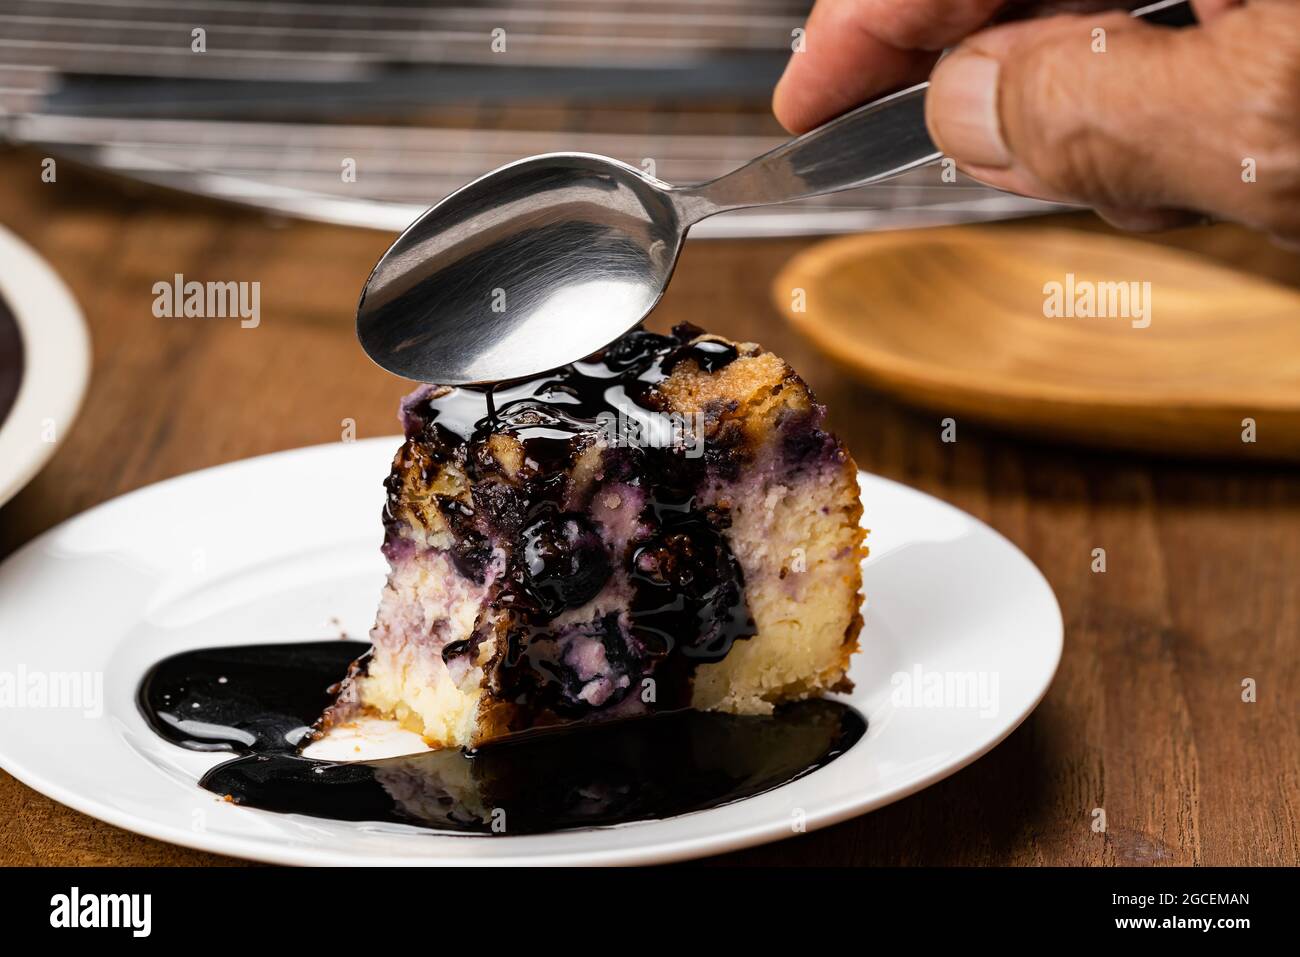 Senior hand using metal spoon eating delicious homemade blueberry and crumble cheesecake topping with chocolate in white ceramic plate on wooden table Stock Photo